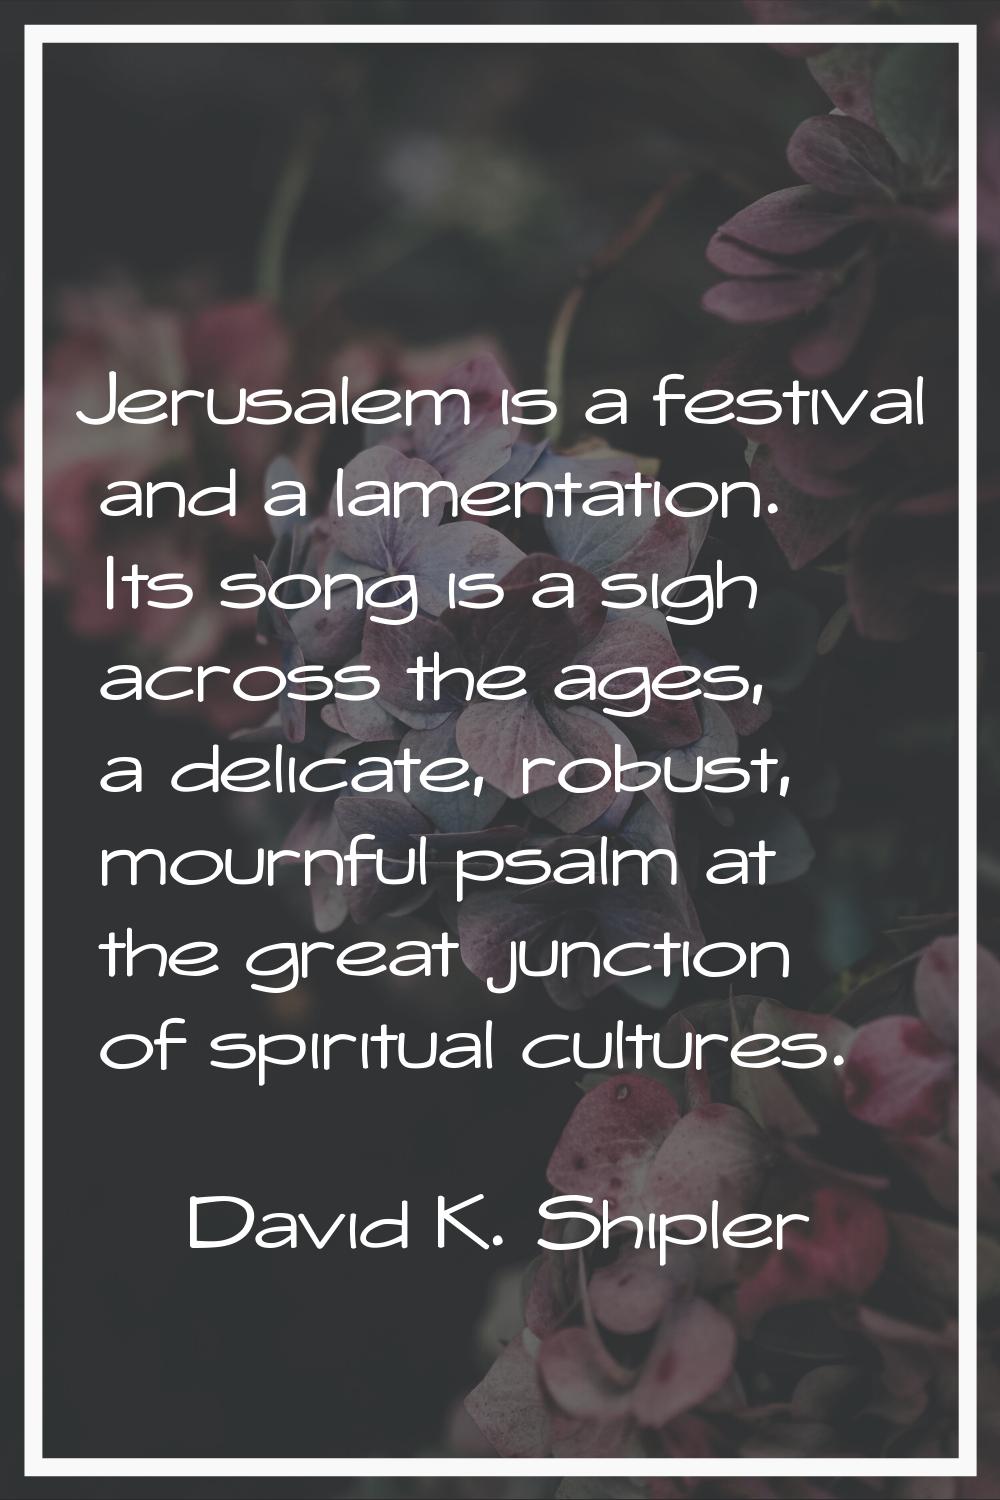 Jerusalem is a festival and a lamentation. Its song is a sigh across the ages, a delicate, robust, 